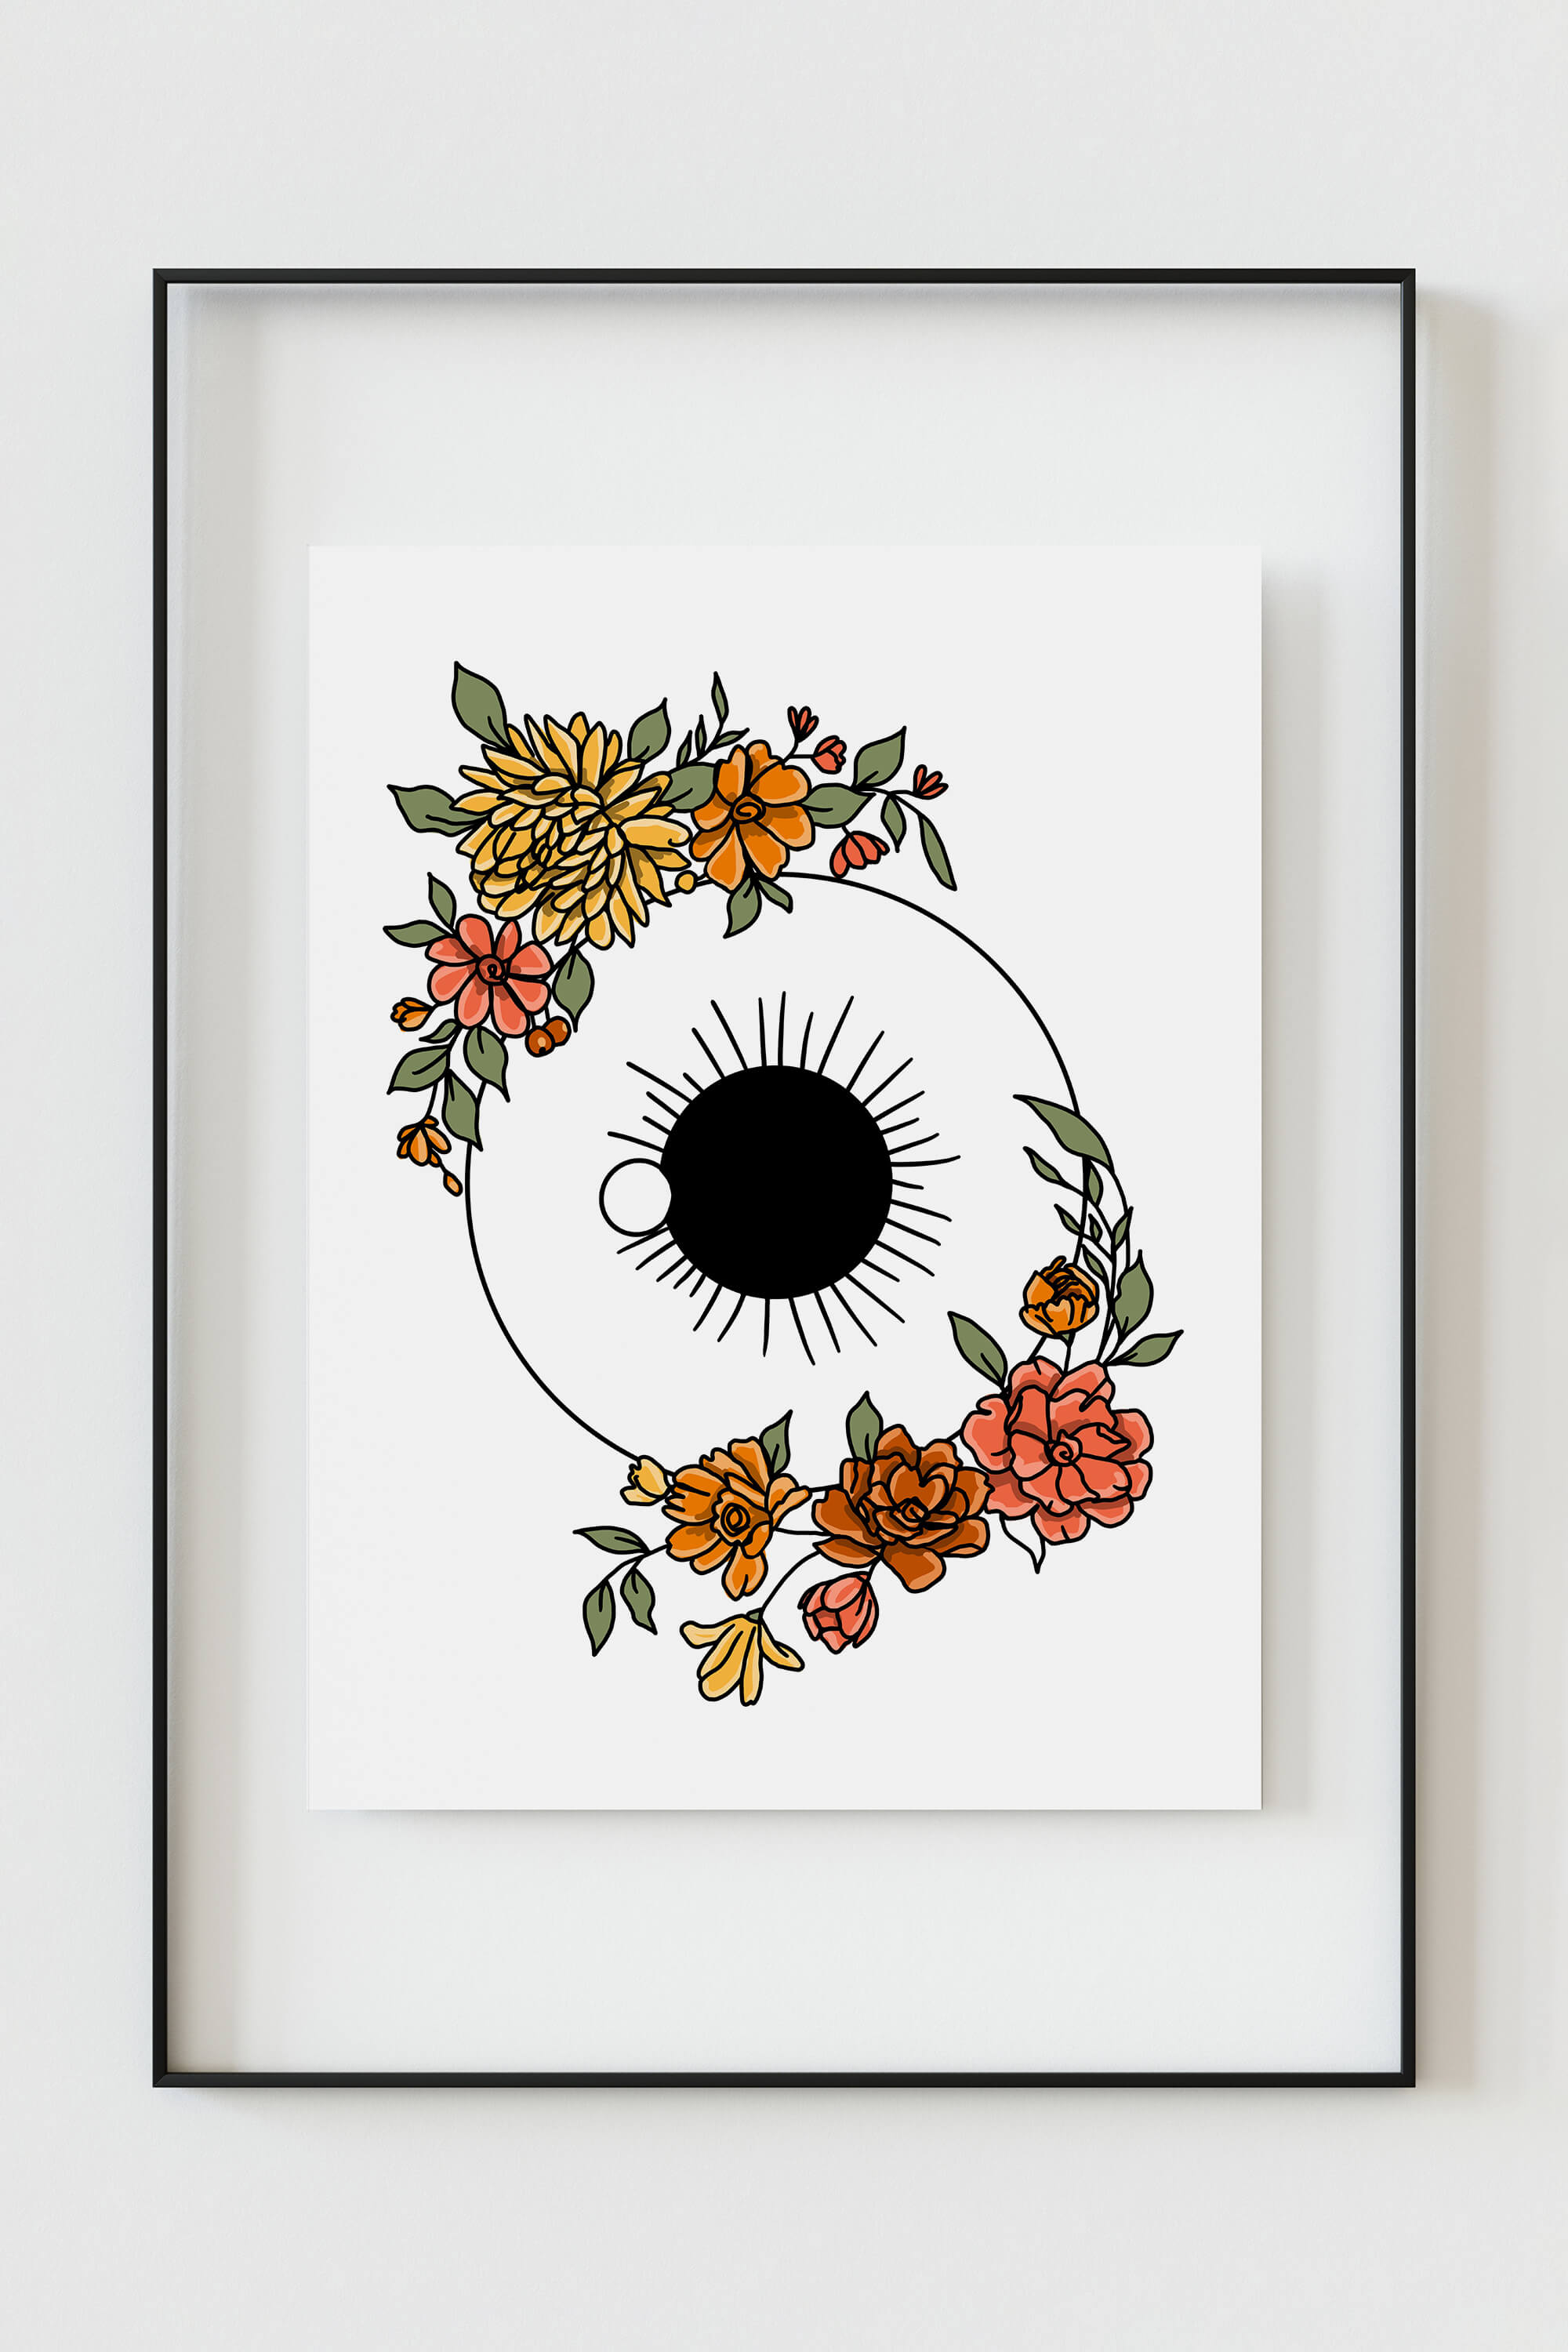 Dive into a visual journey with this abstract eye art print. Transcending boundaries, it adds a special touch to any space. A mesmerizing blend of creativity and science, perfect for those who appreciate the limitless possibilities of art.